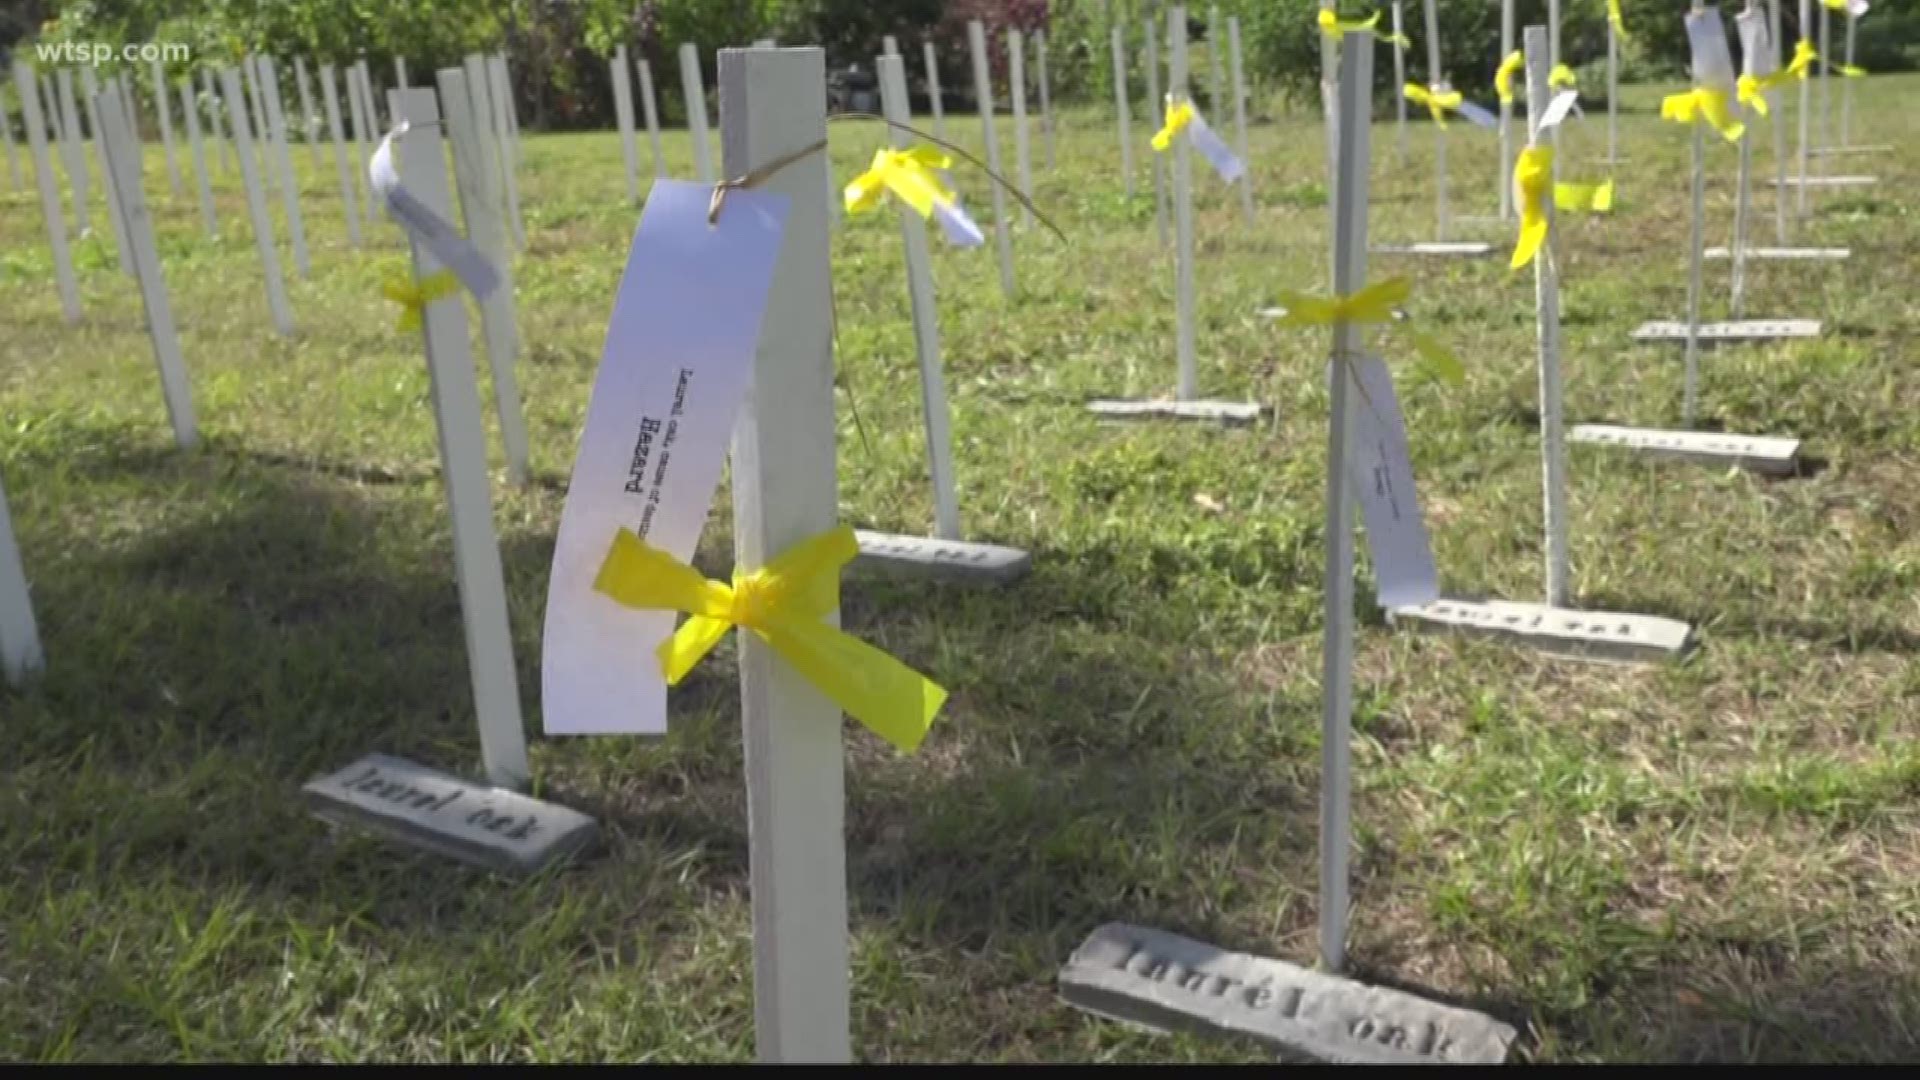 In and around Gulfport, people are planting trees. It’s all thanks to an art memorial and initiative to plant trees to replace the ones that were cut down.